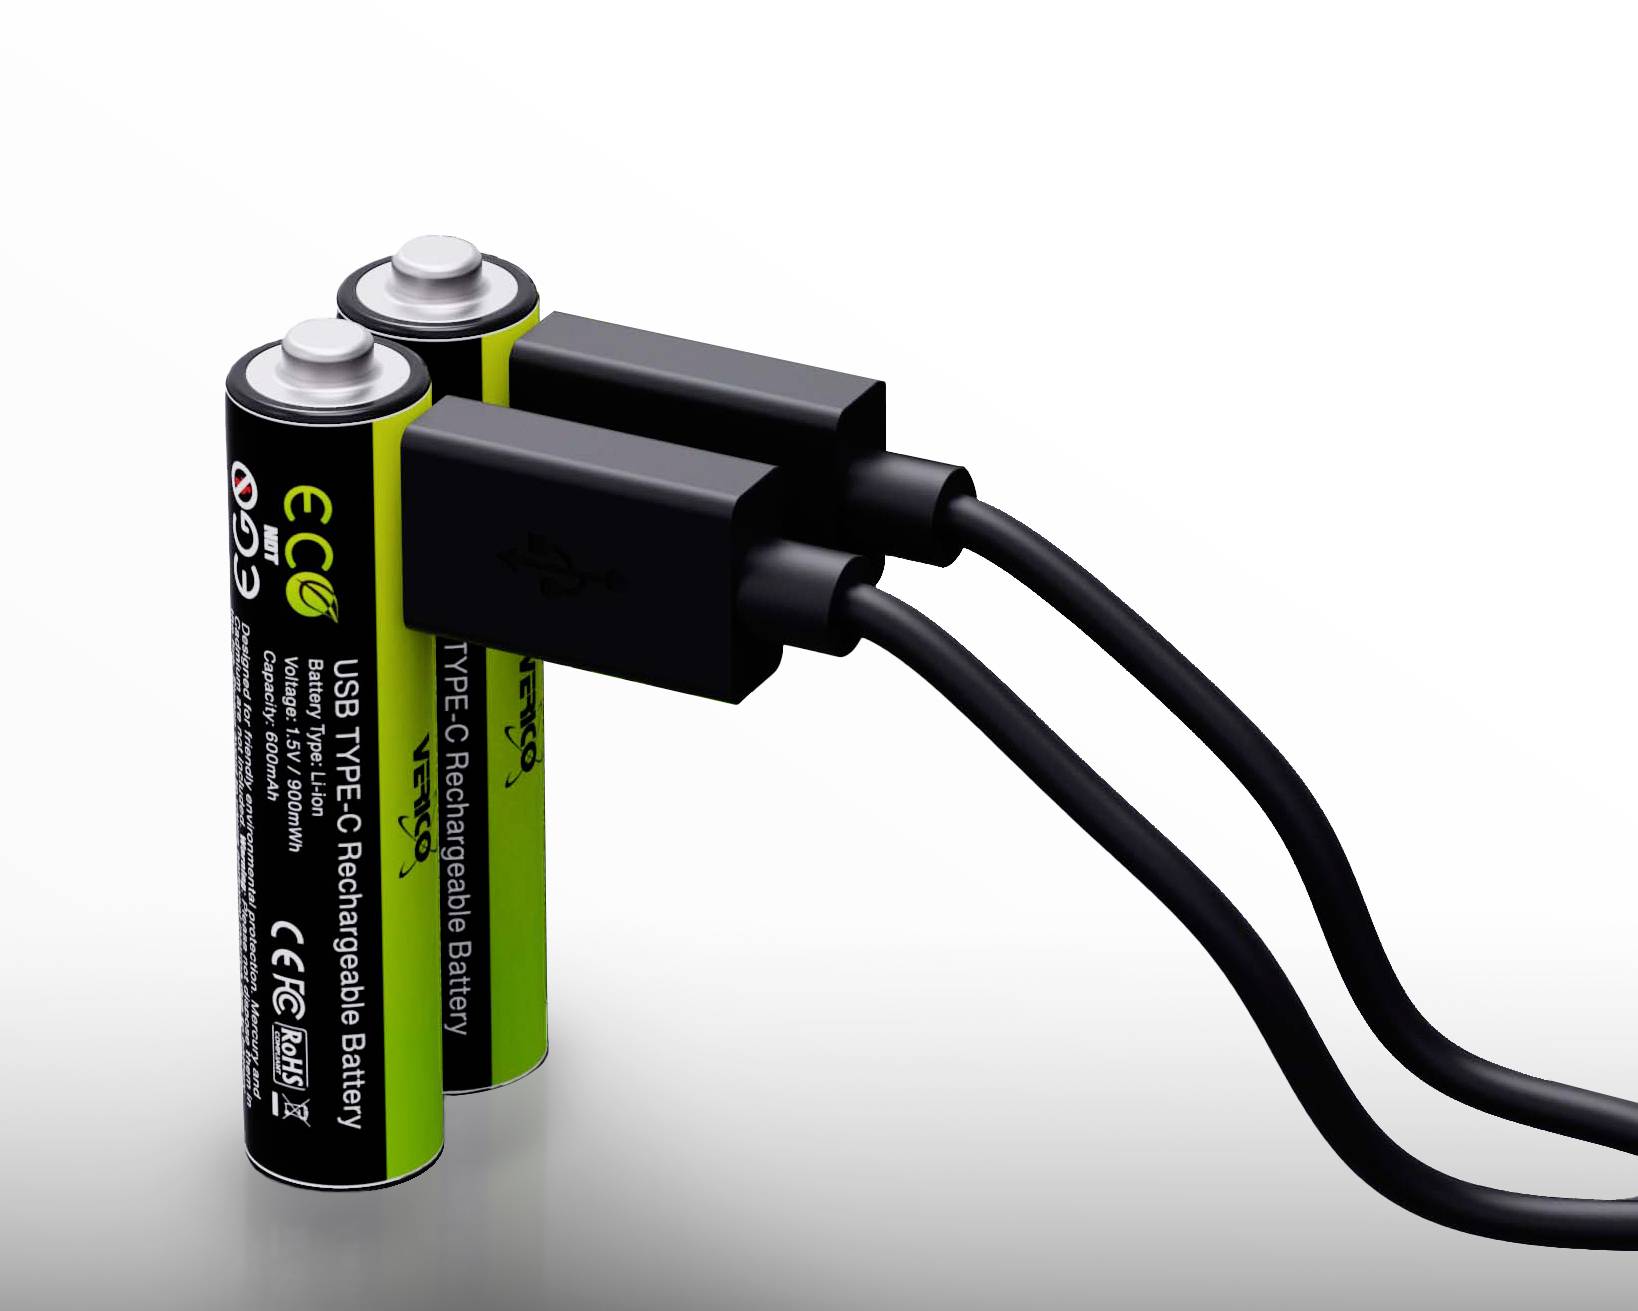 Pile rechargeable AAA Micro 1,5V USB C 2 pièces - HORNBACH